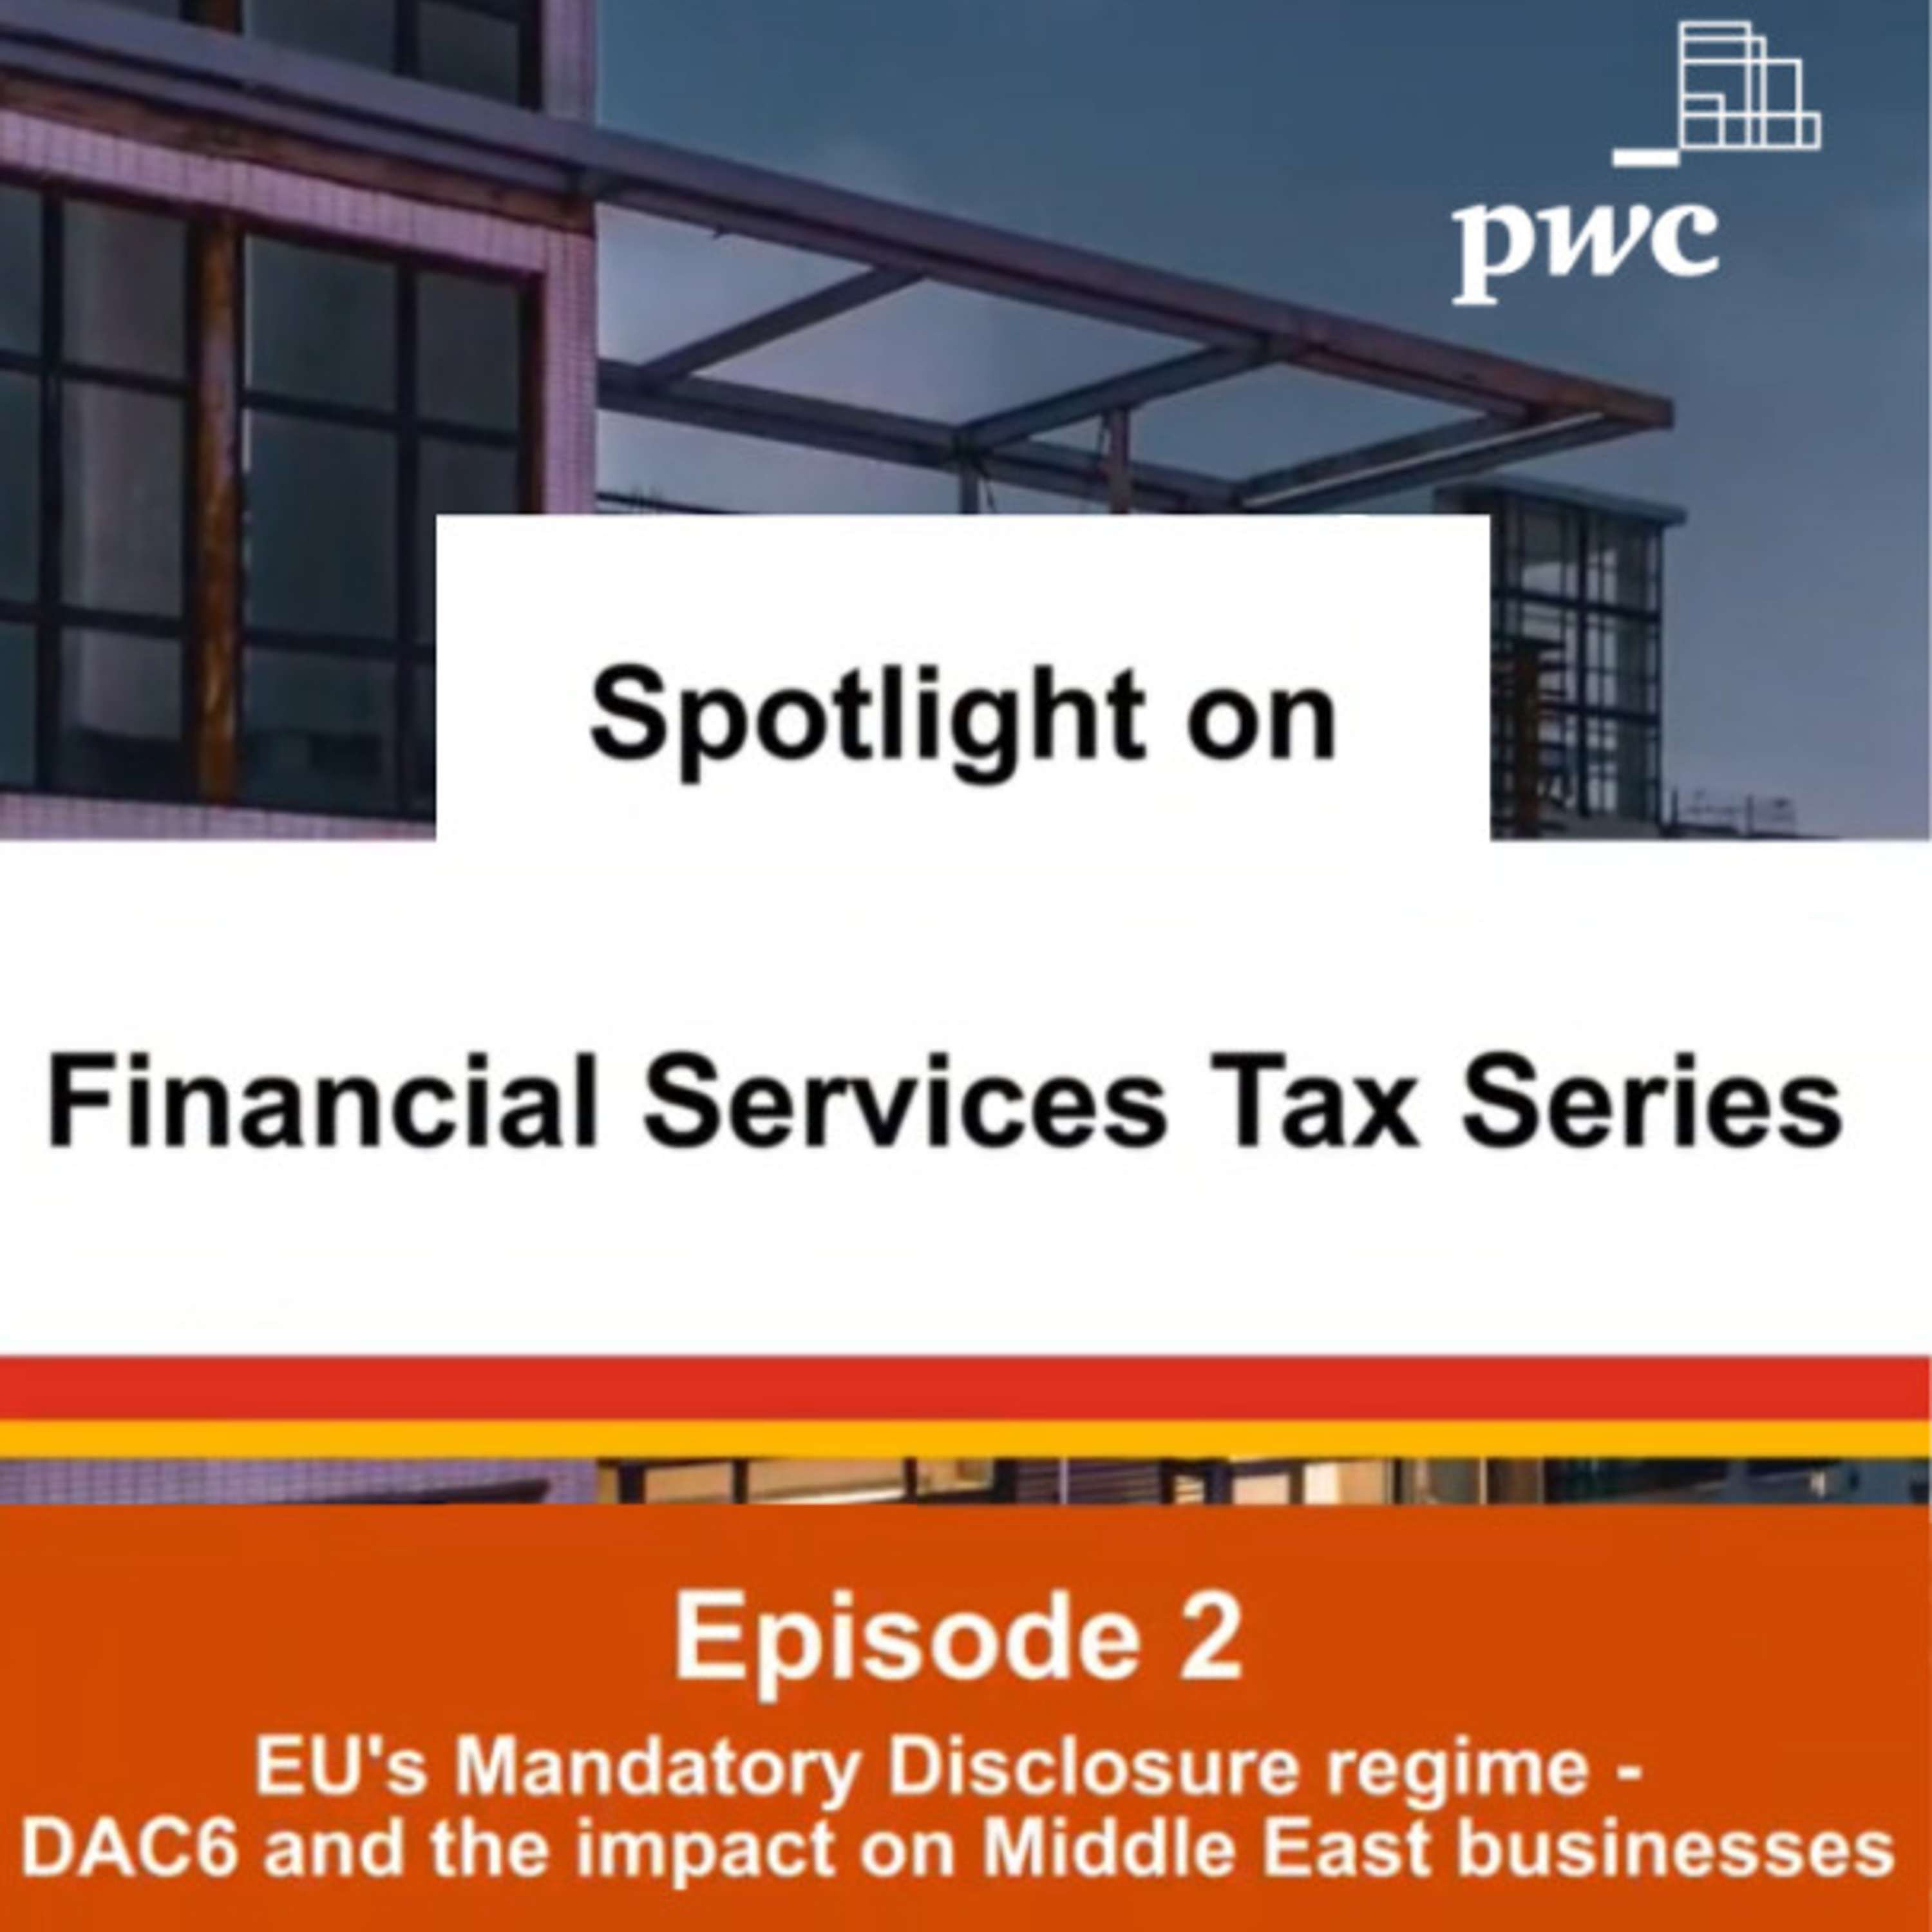 Series 1 - Episode 2: EU’s Mandatory Disclosure Regime | DAC6 and the impact on Middle East businesses